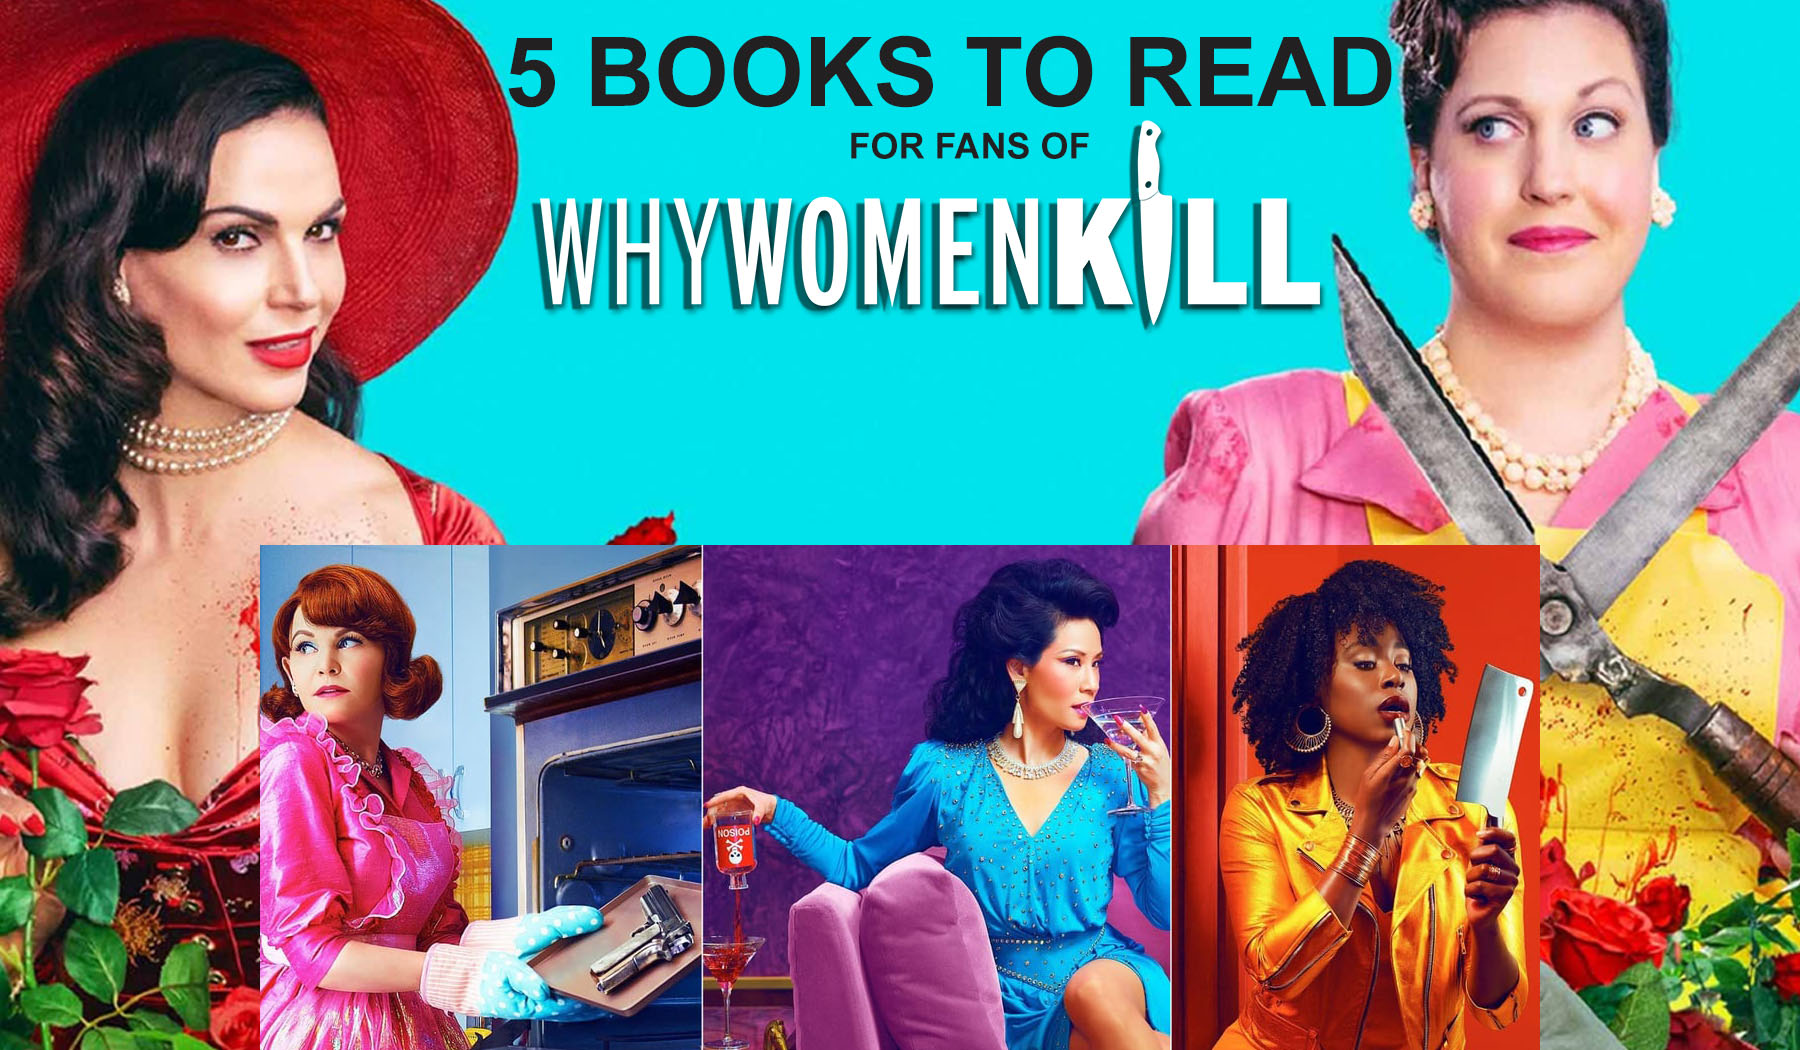 books to read for fans of why women kill